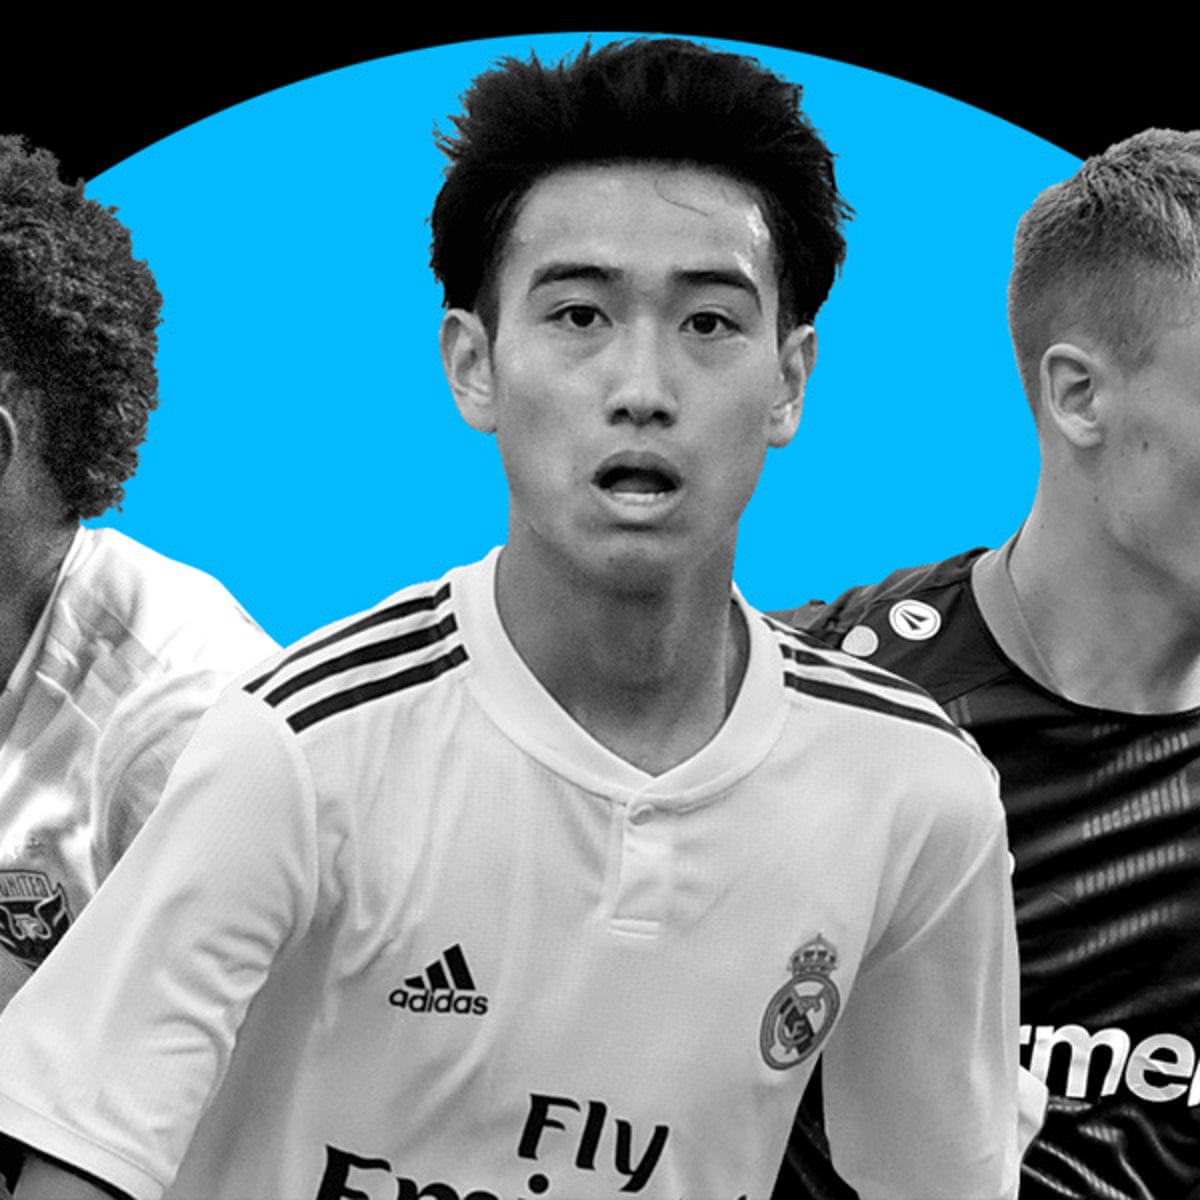 Next Generation 2020: 60 of the best young talents in world